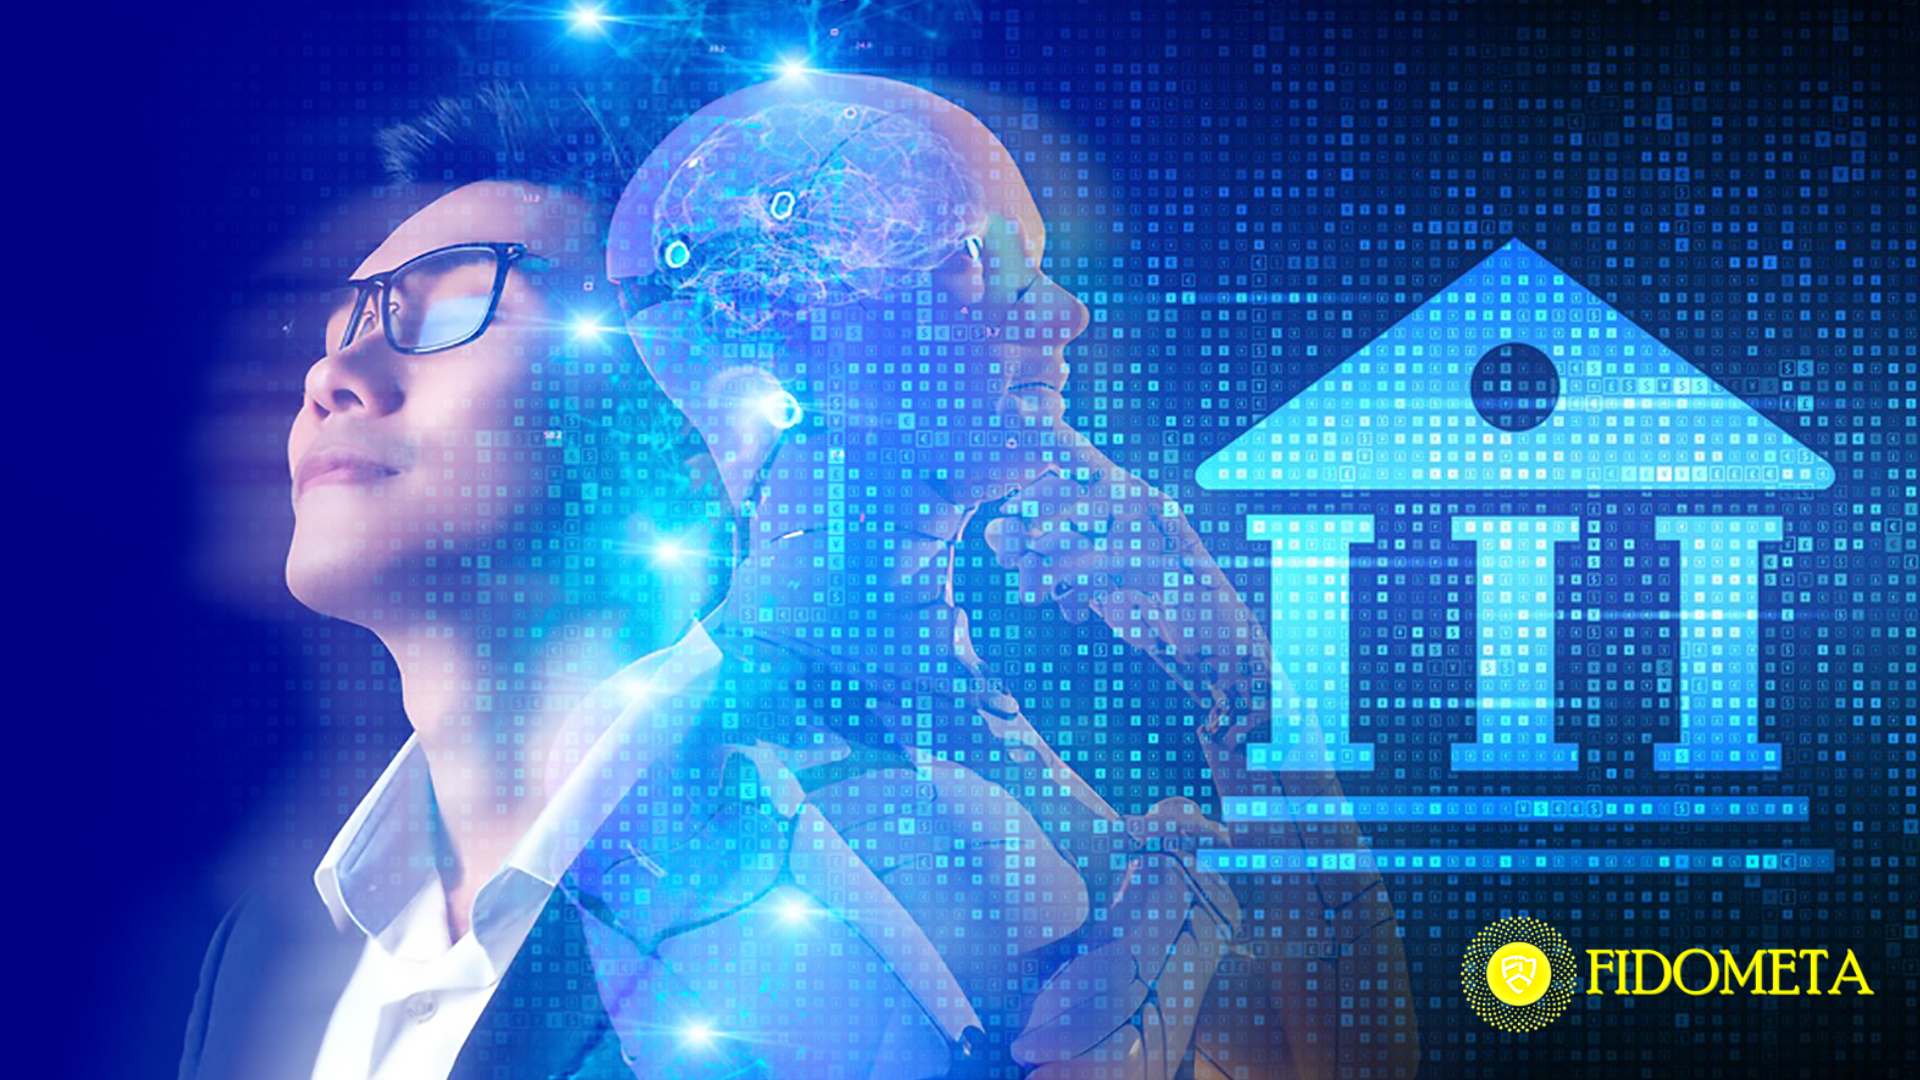 How FIDOMETA is changing the Financial world through the Metaverse